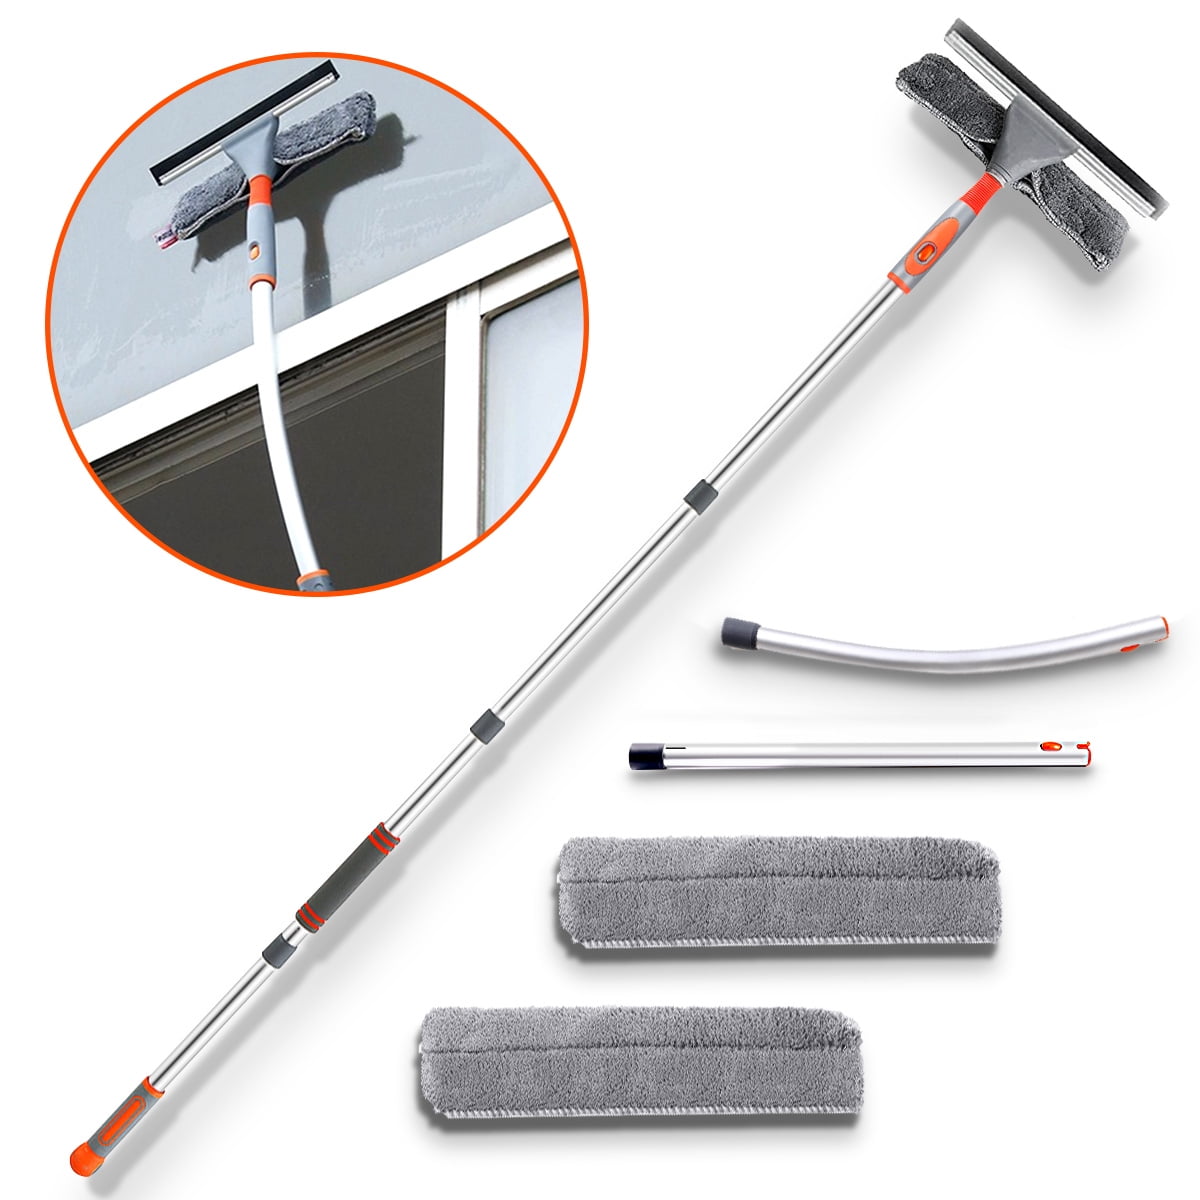 MATCC Car Window Cleaning Squeegee with Microfiber Scrubber 2 in 1 Windshield Cleaning Squeegee with Long Extension Pole Squeegee Window Cleaner for Car Home Shop Bus or RV 